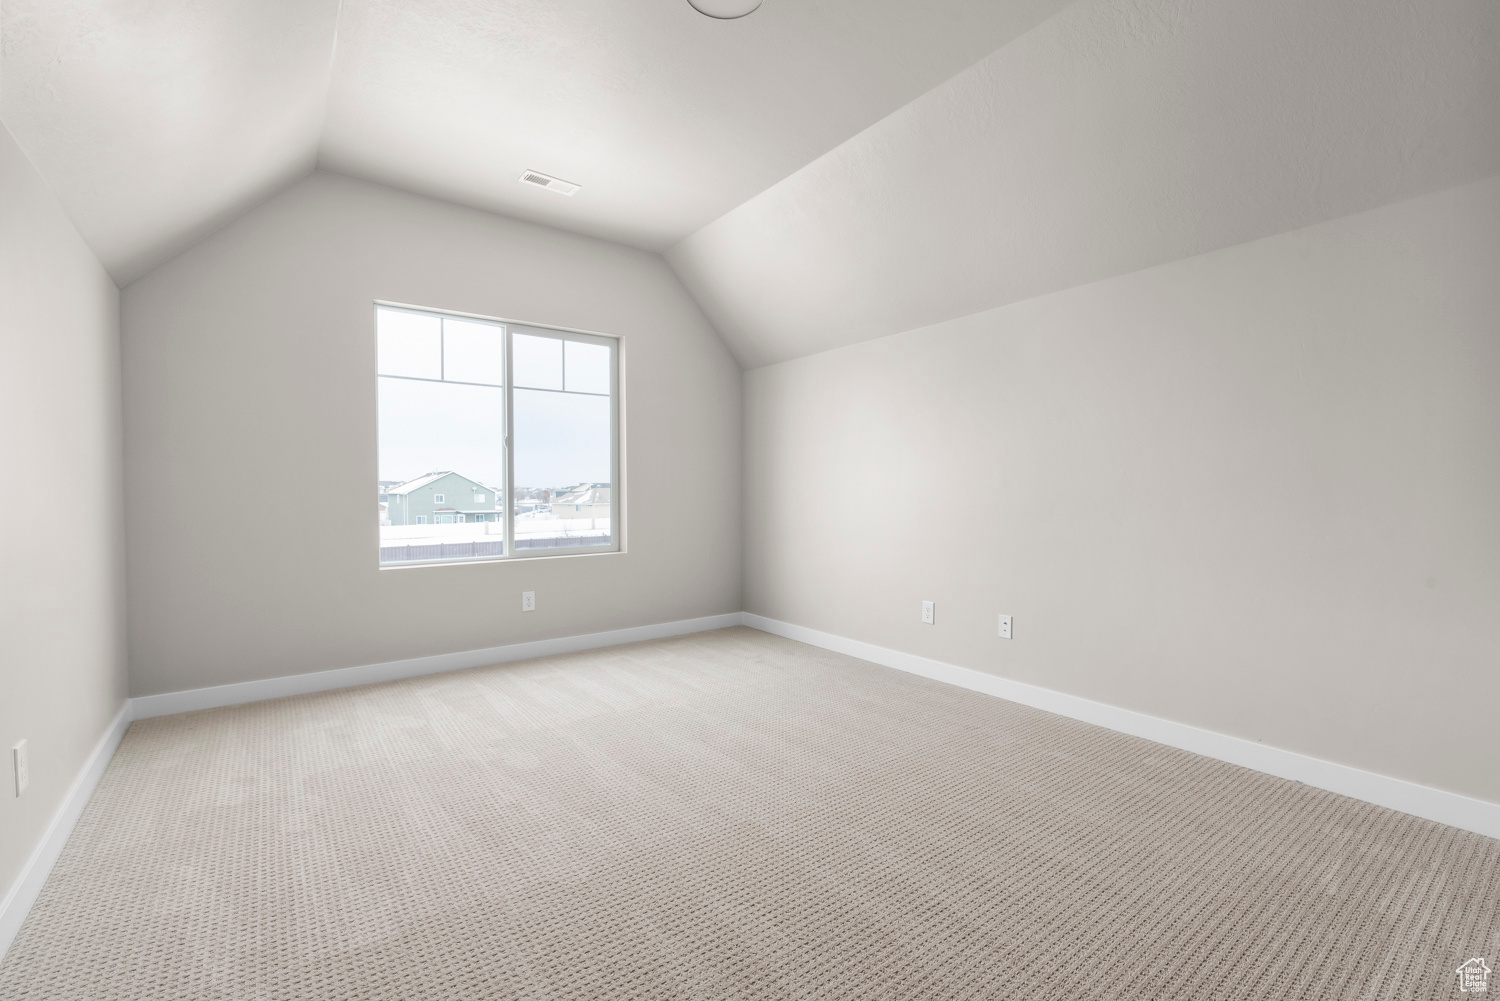 Bonus room with lofted ceiling and light colored carpet